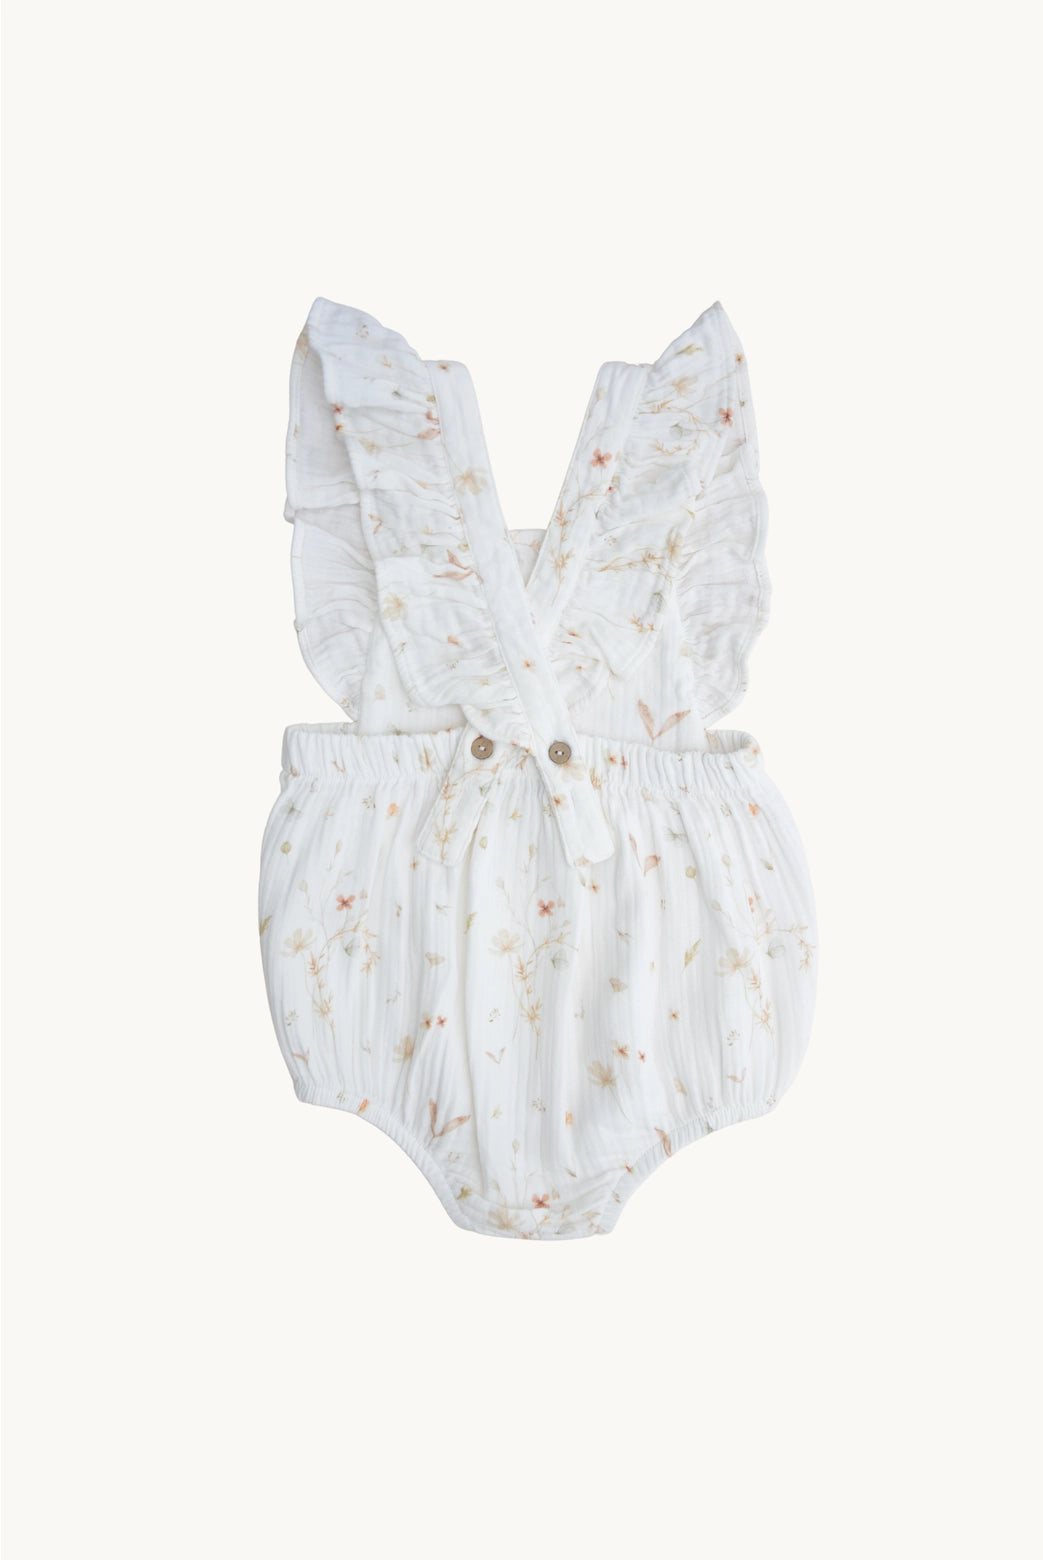 Eli and new organic cotton muslin girls romper best seller white with soft floral detail neutral 